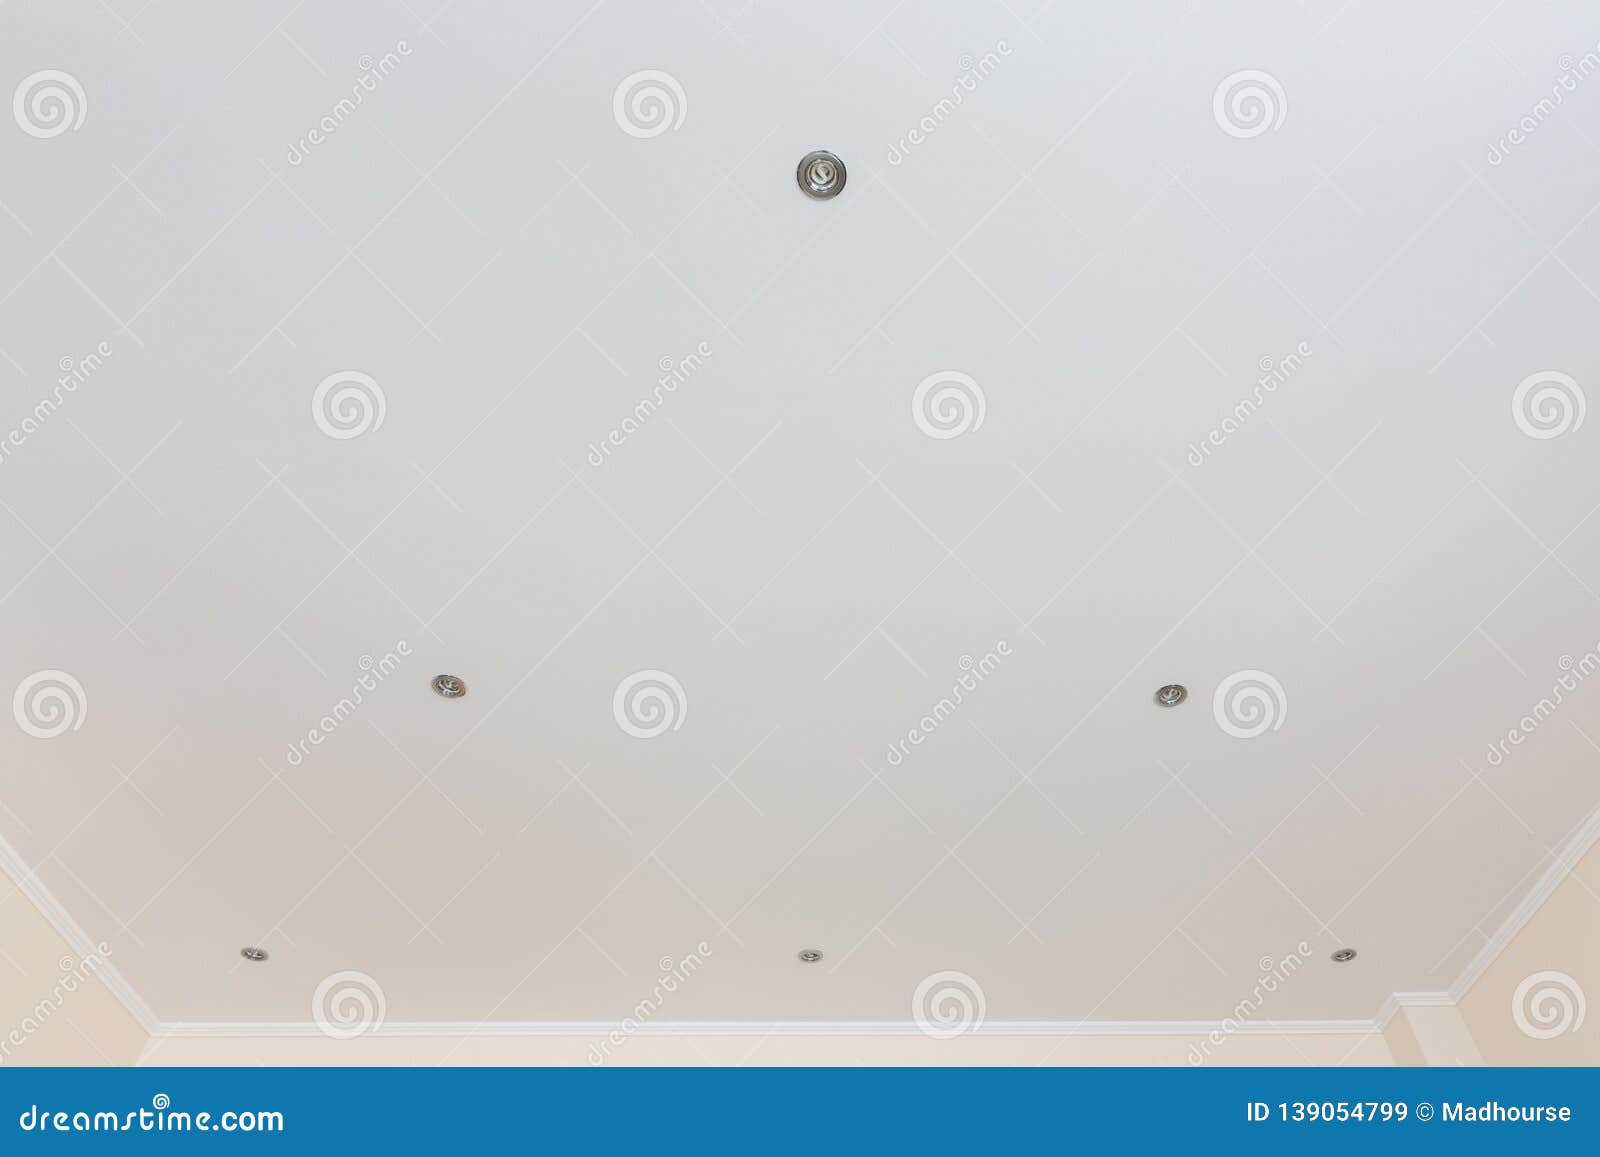 Suspended Ceiling Plasterboard With Built In Lights Stock Image